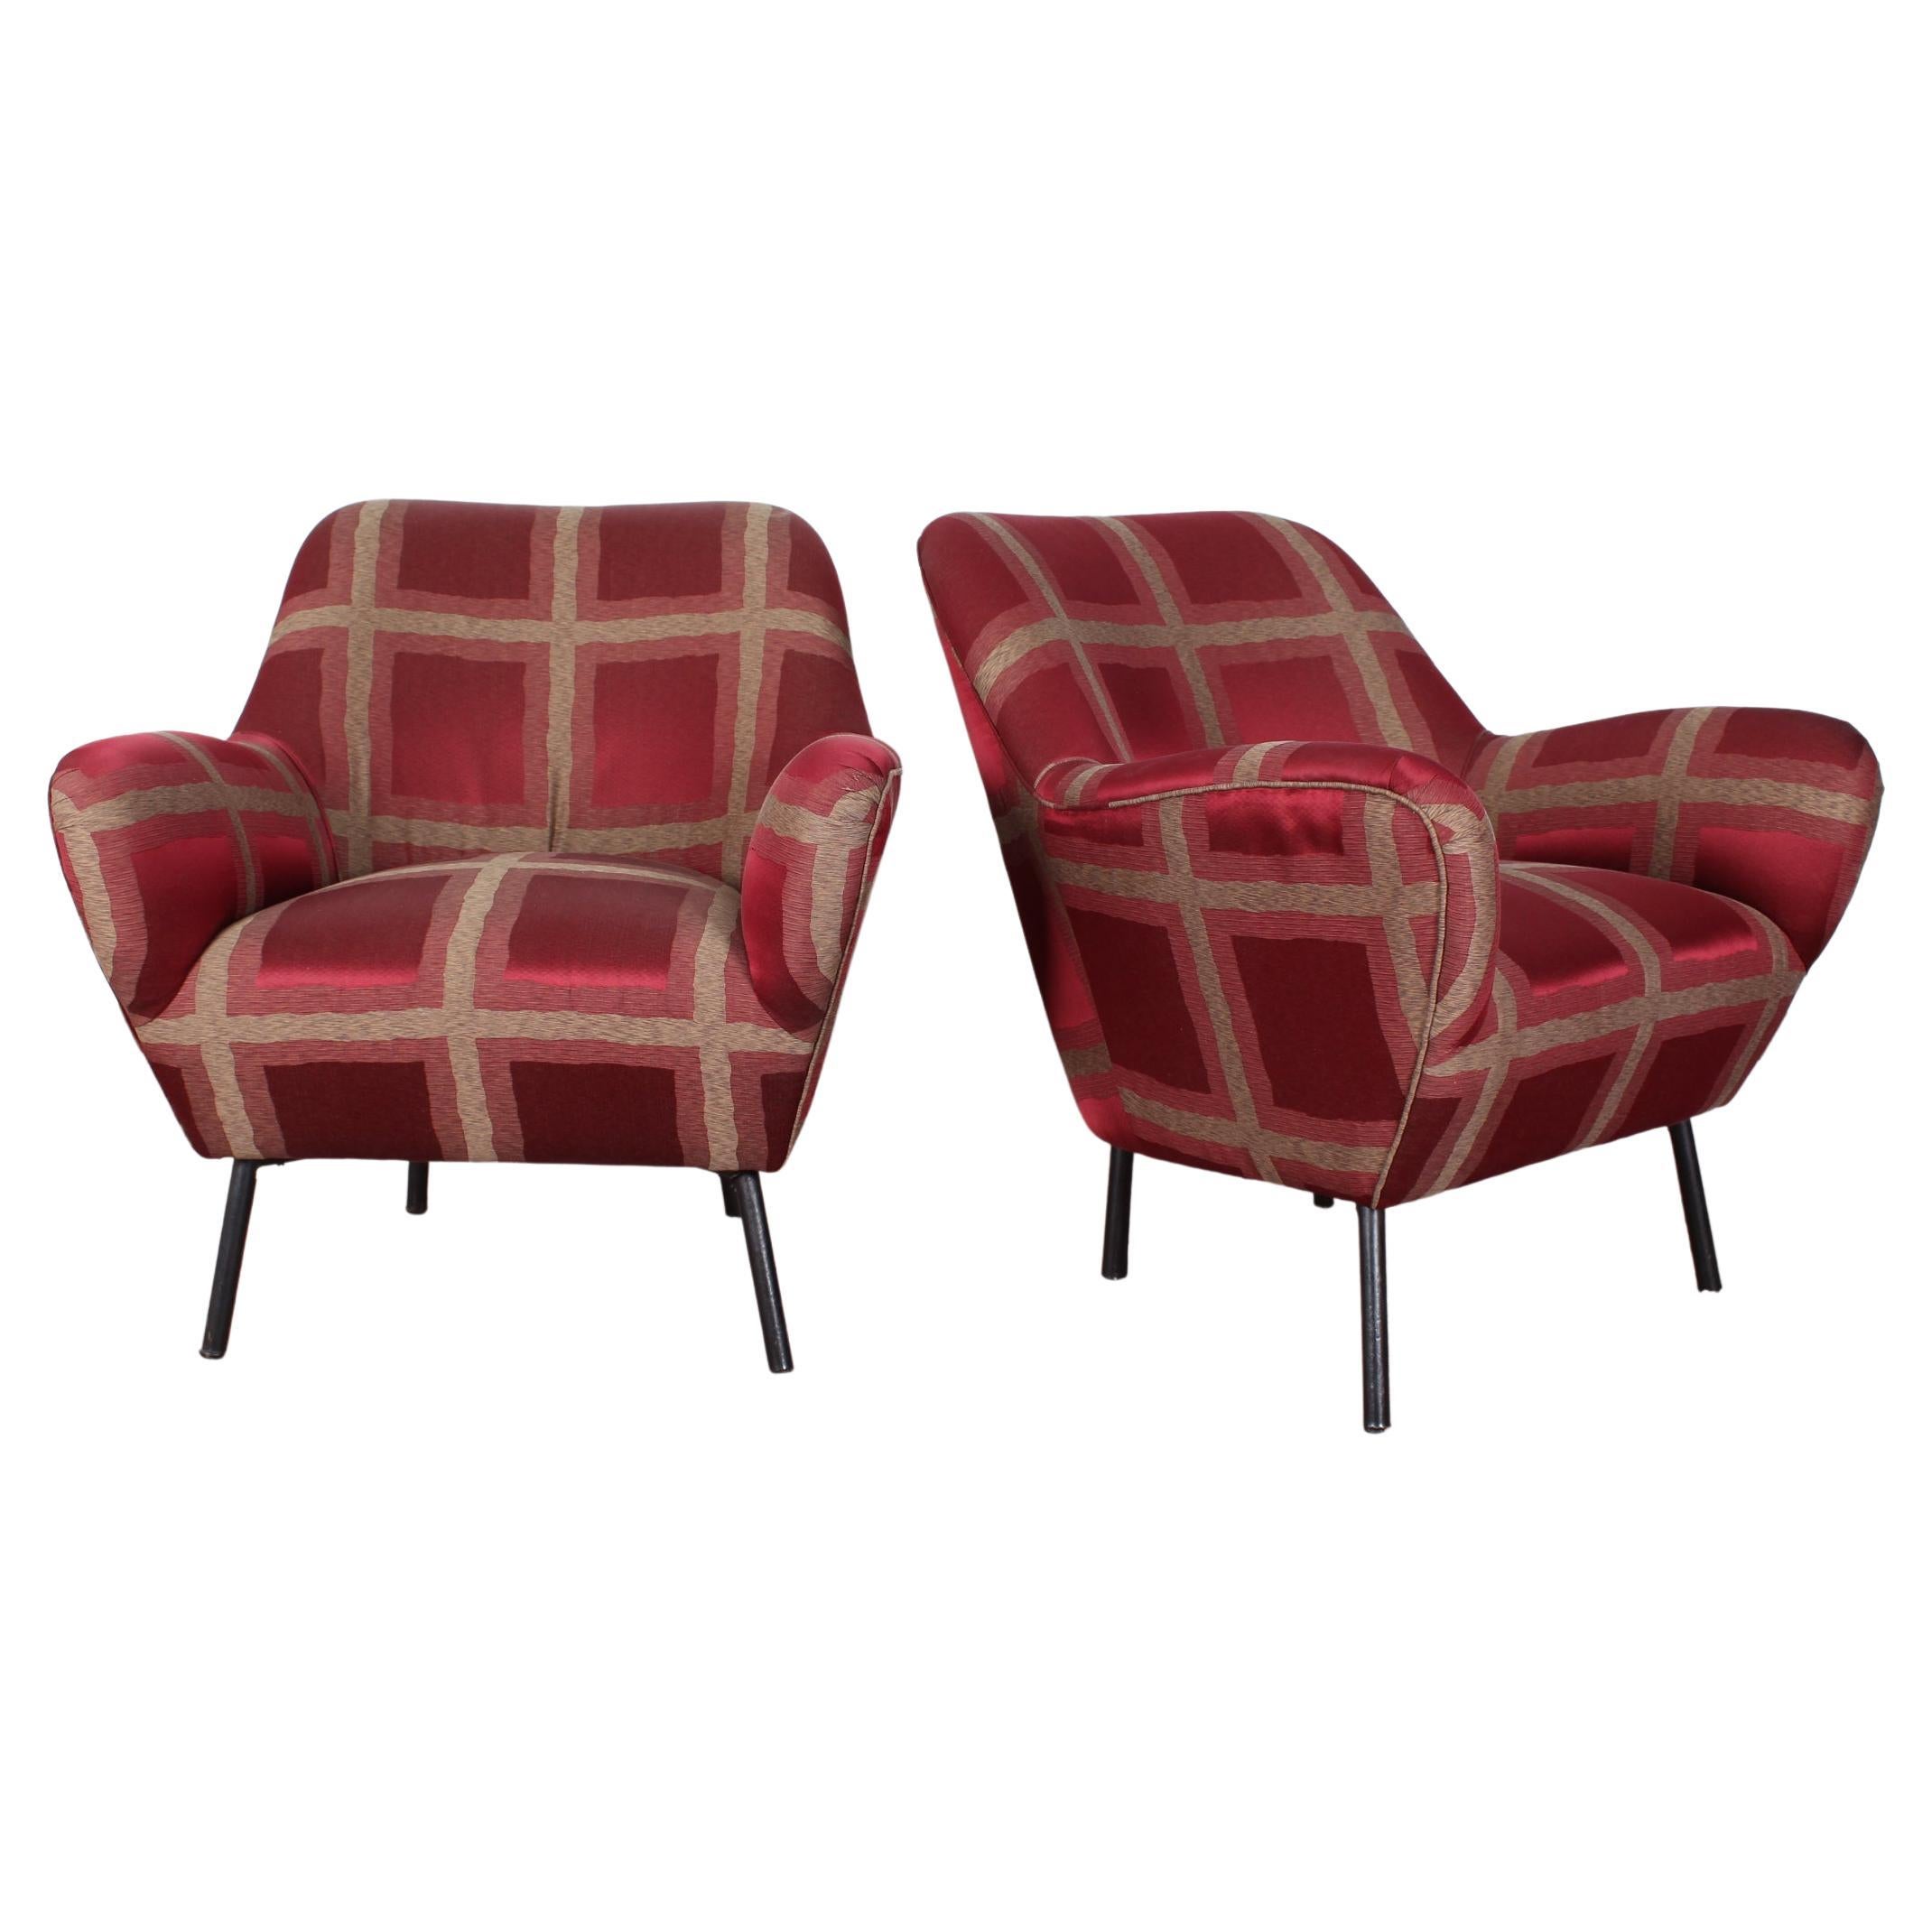 O. Borsani Mid-Century Red Checked Satin Pair of Armchairs, Italy 1950s For Sale